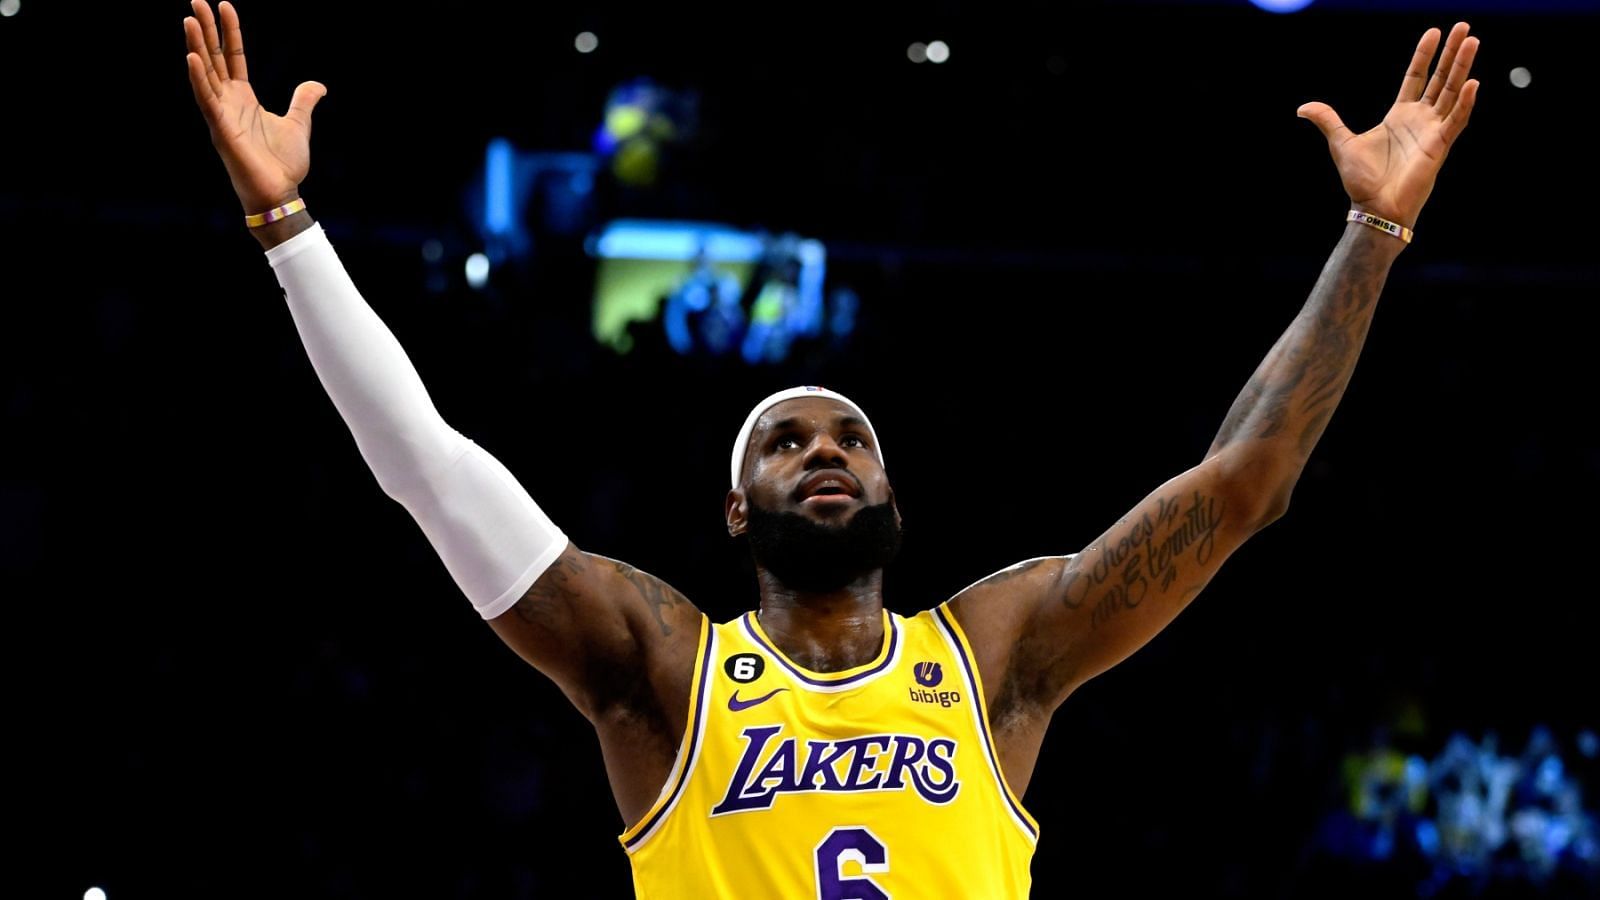 LA Lakers superstar LeBron James after breaking the all-time scoring record